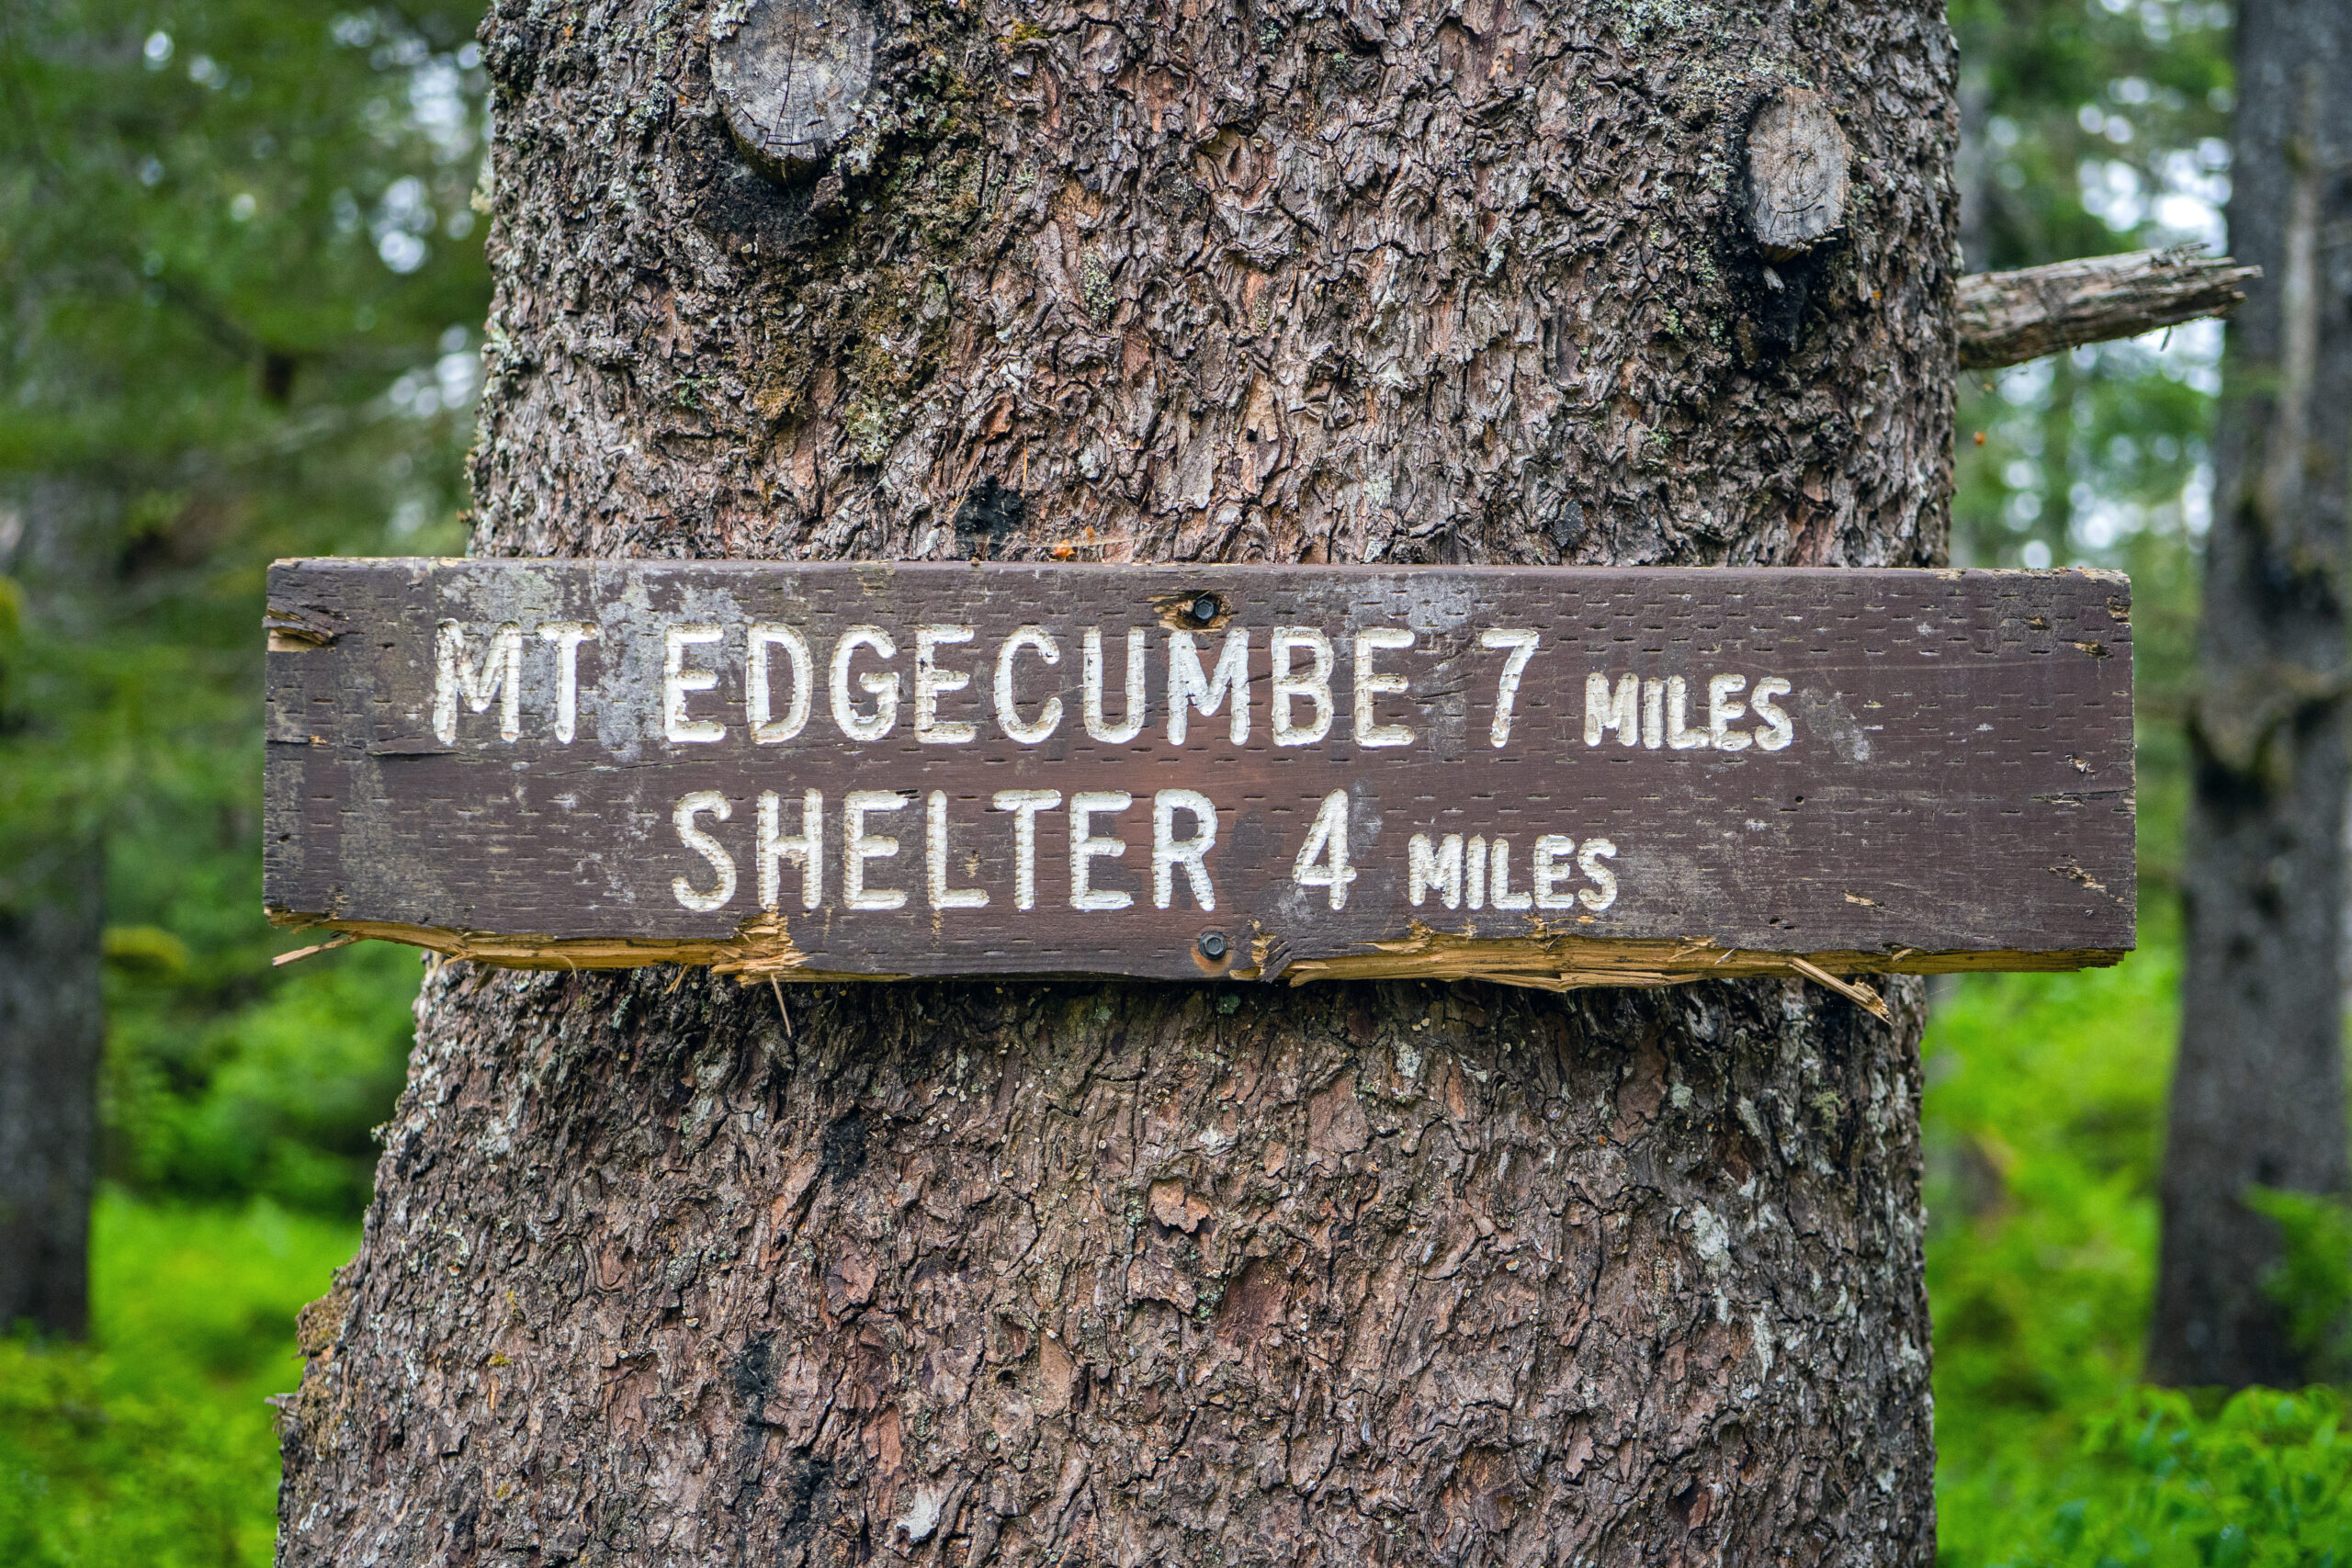 Trail sign nailed to a tree that reads, "Mt. Edgecumbe 7 Miles, Shelter 4 Miles"